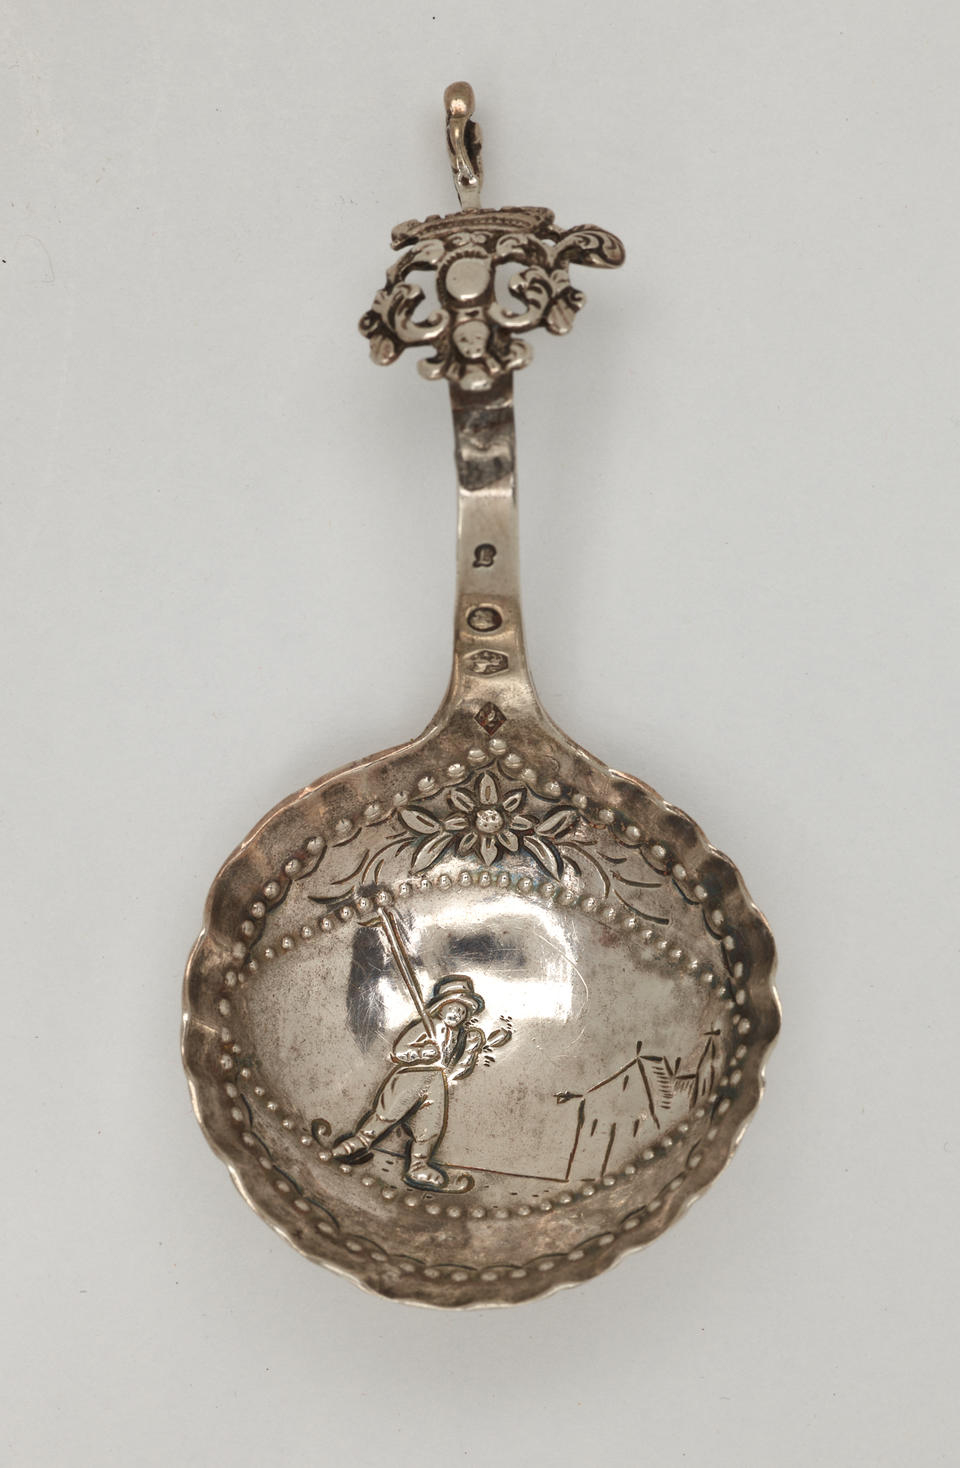 A silver caddy spoon with figurative and sculptural elements.